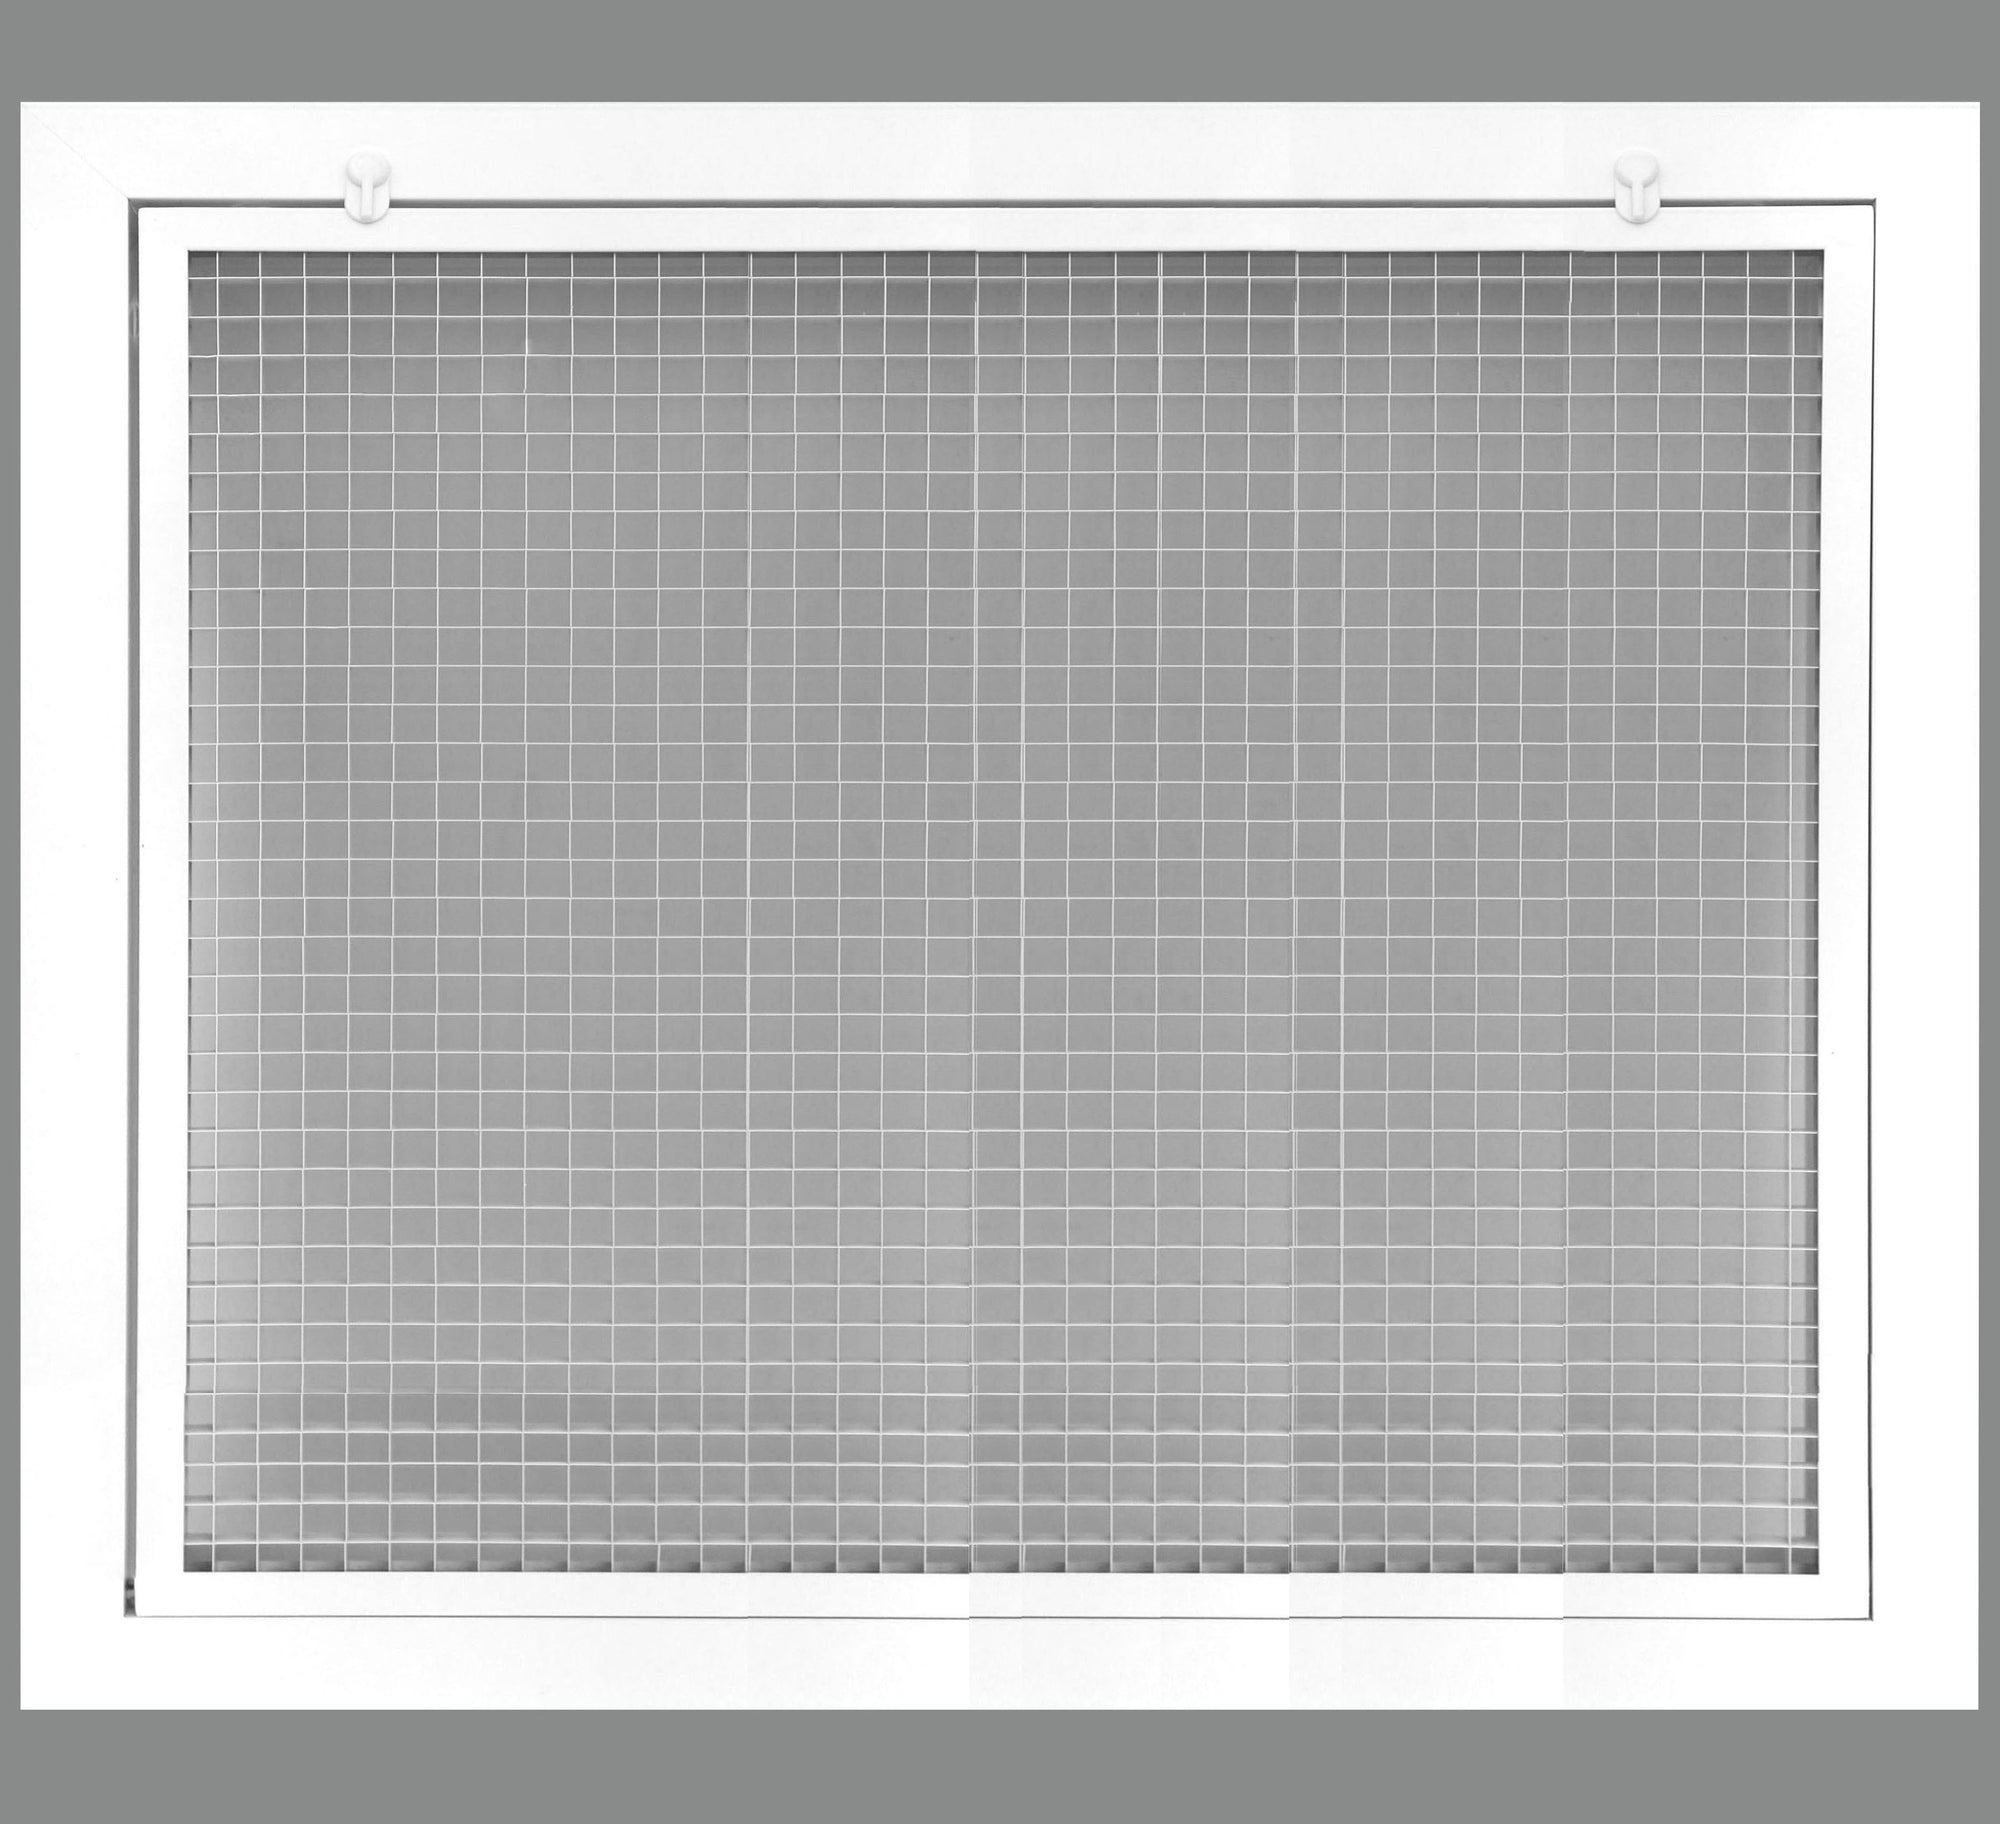 16" x 14" Cube Core Eggcrate Return Air Filter Grille for 1" Filter